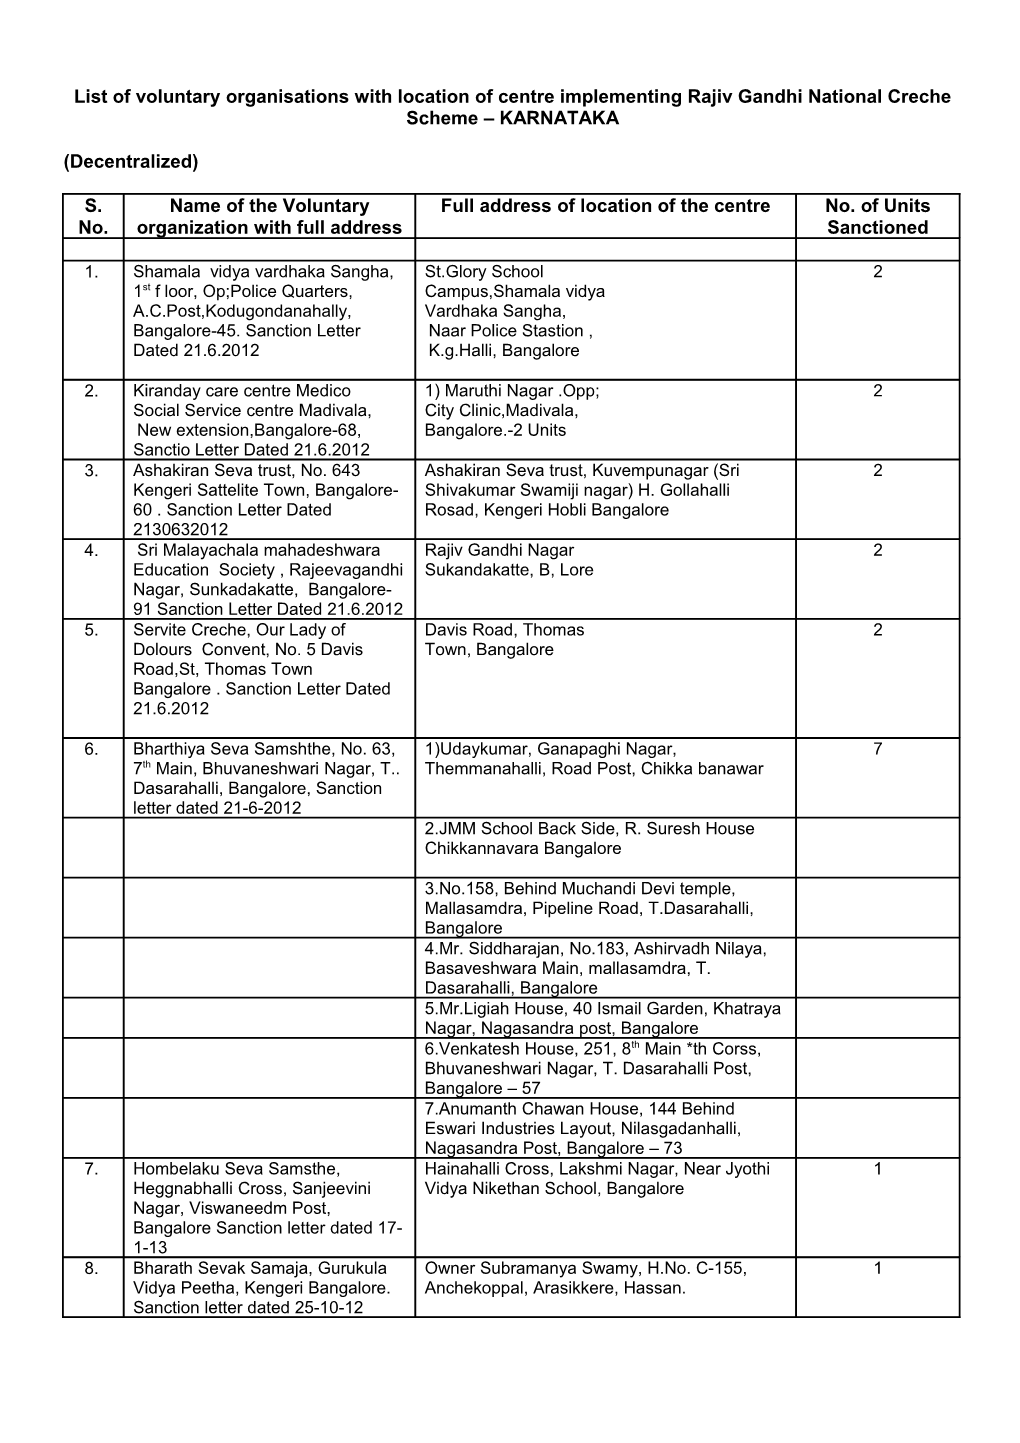 List of Voluntary Organisations with Location of Centre Implementing Rajiv Gandhi National